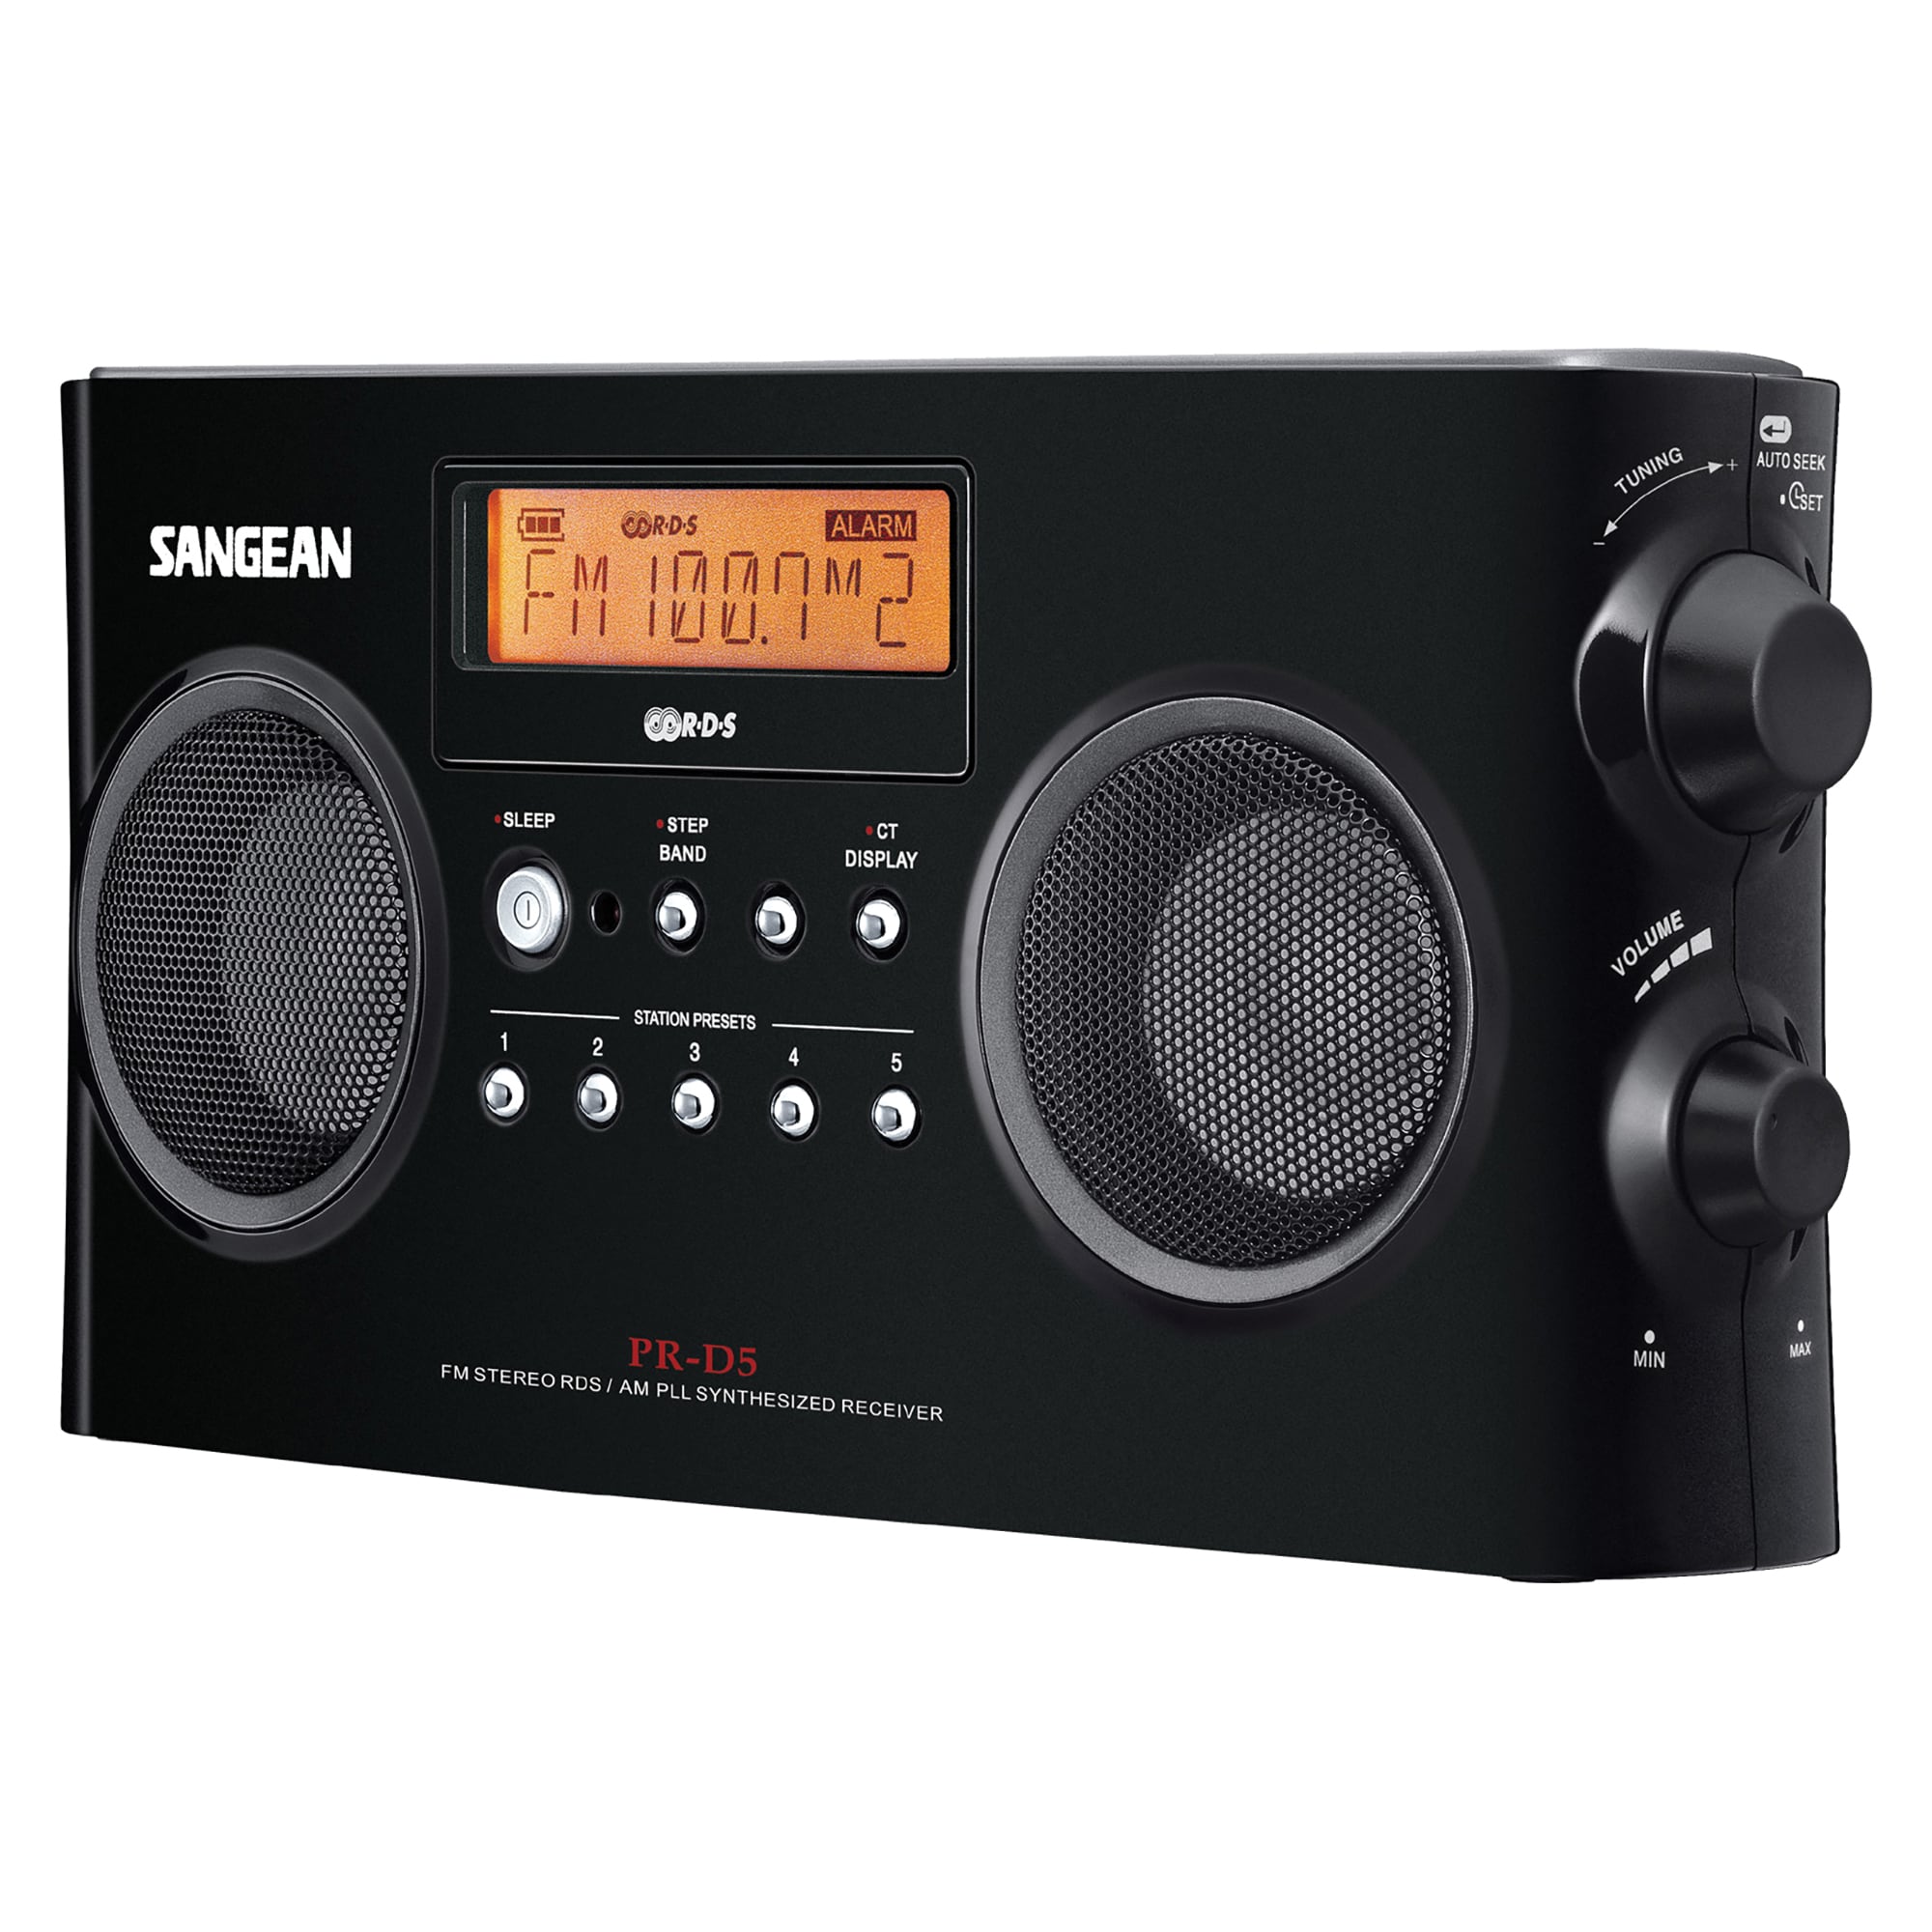 Sangean Black Digital Portable Stereo Receiver with AM/FM Radio - Battery  or AC Powered - 10 Presets - Backlit LCD Display - Headphone Jack - Alarm  in the Boomboxes & Radios department at